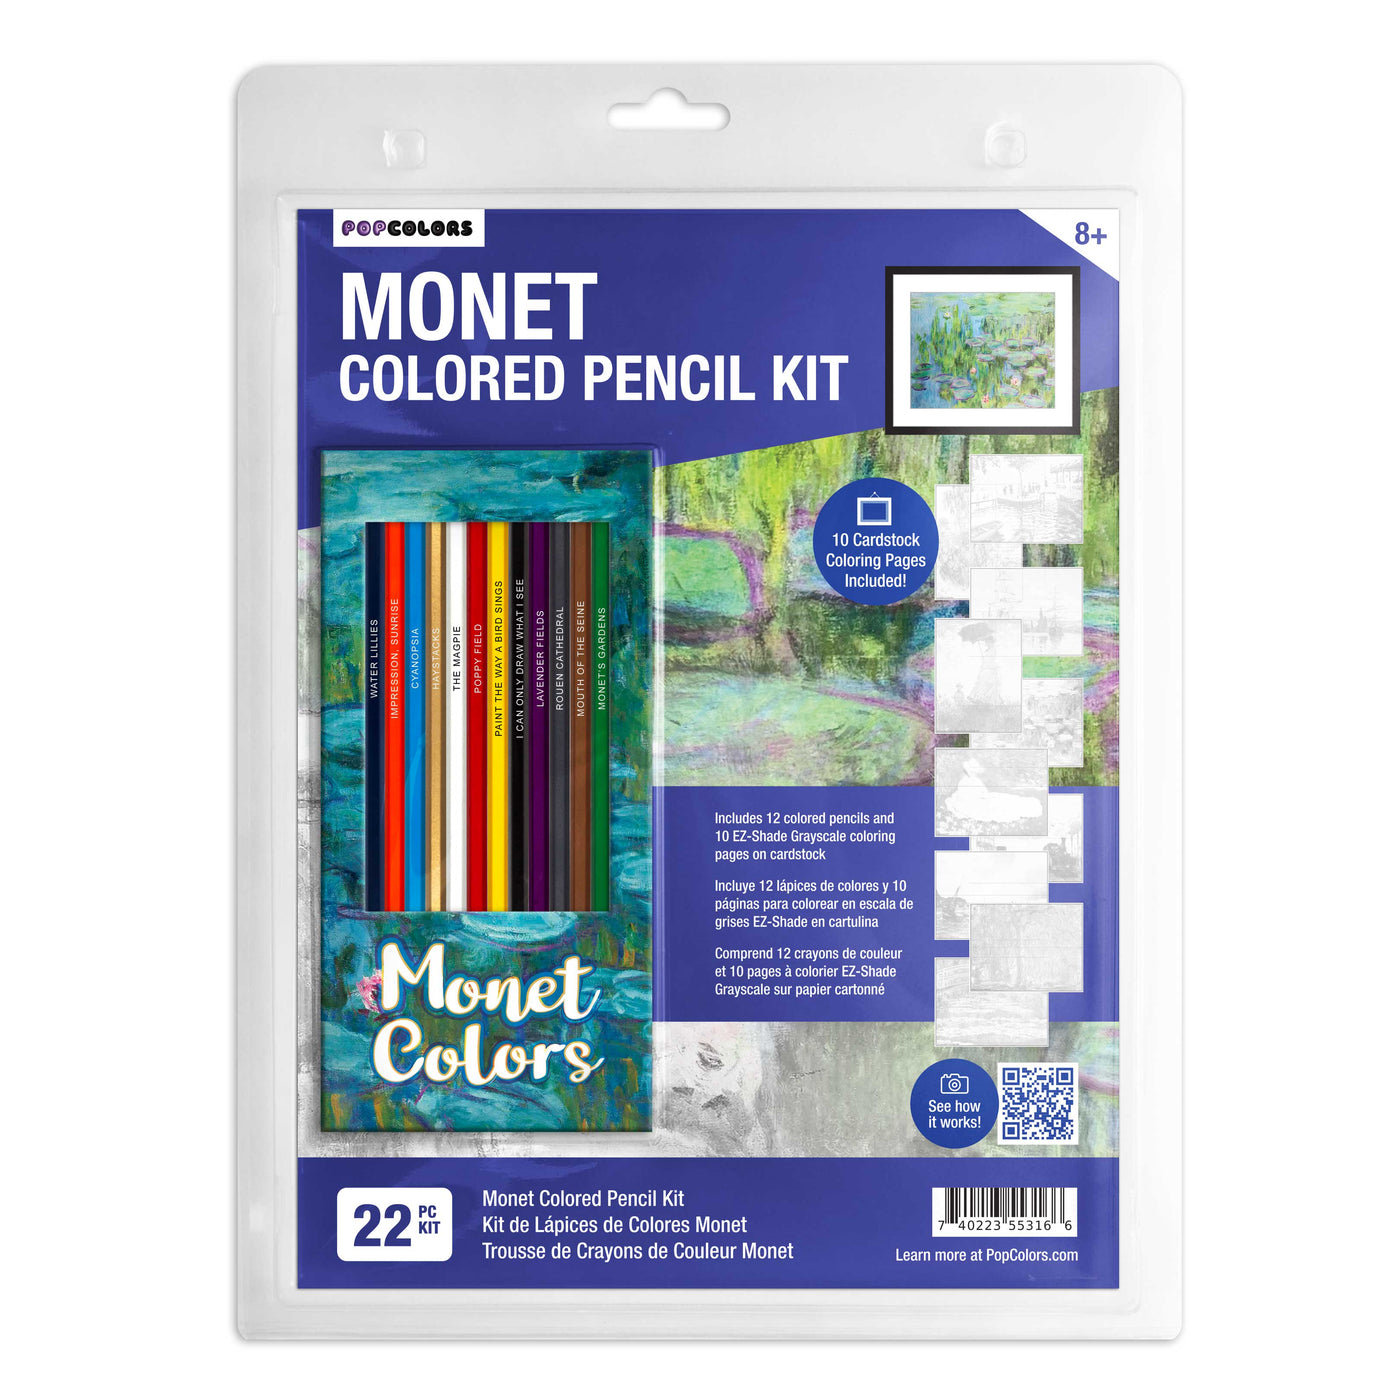 Monet colored pencil kit with coloring pages in packaging